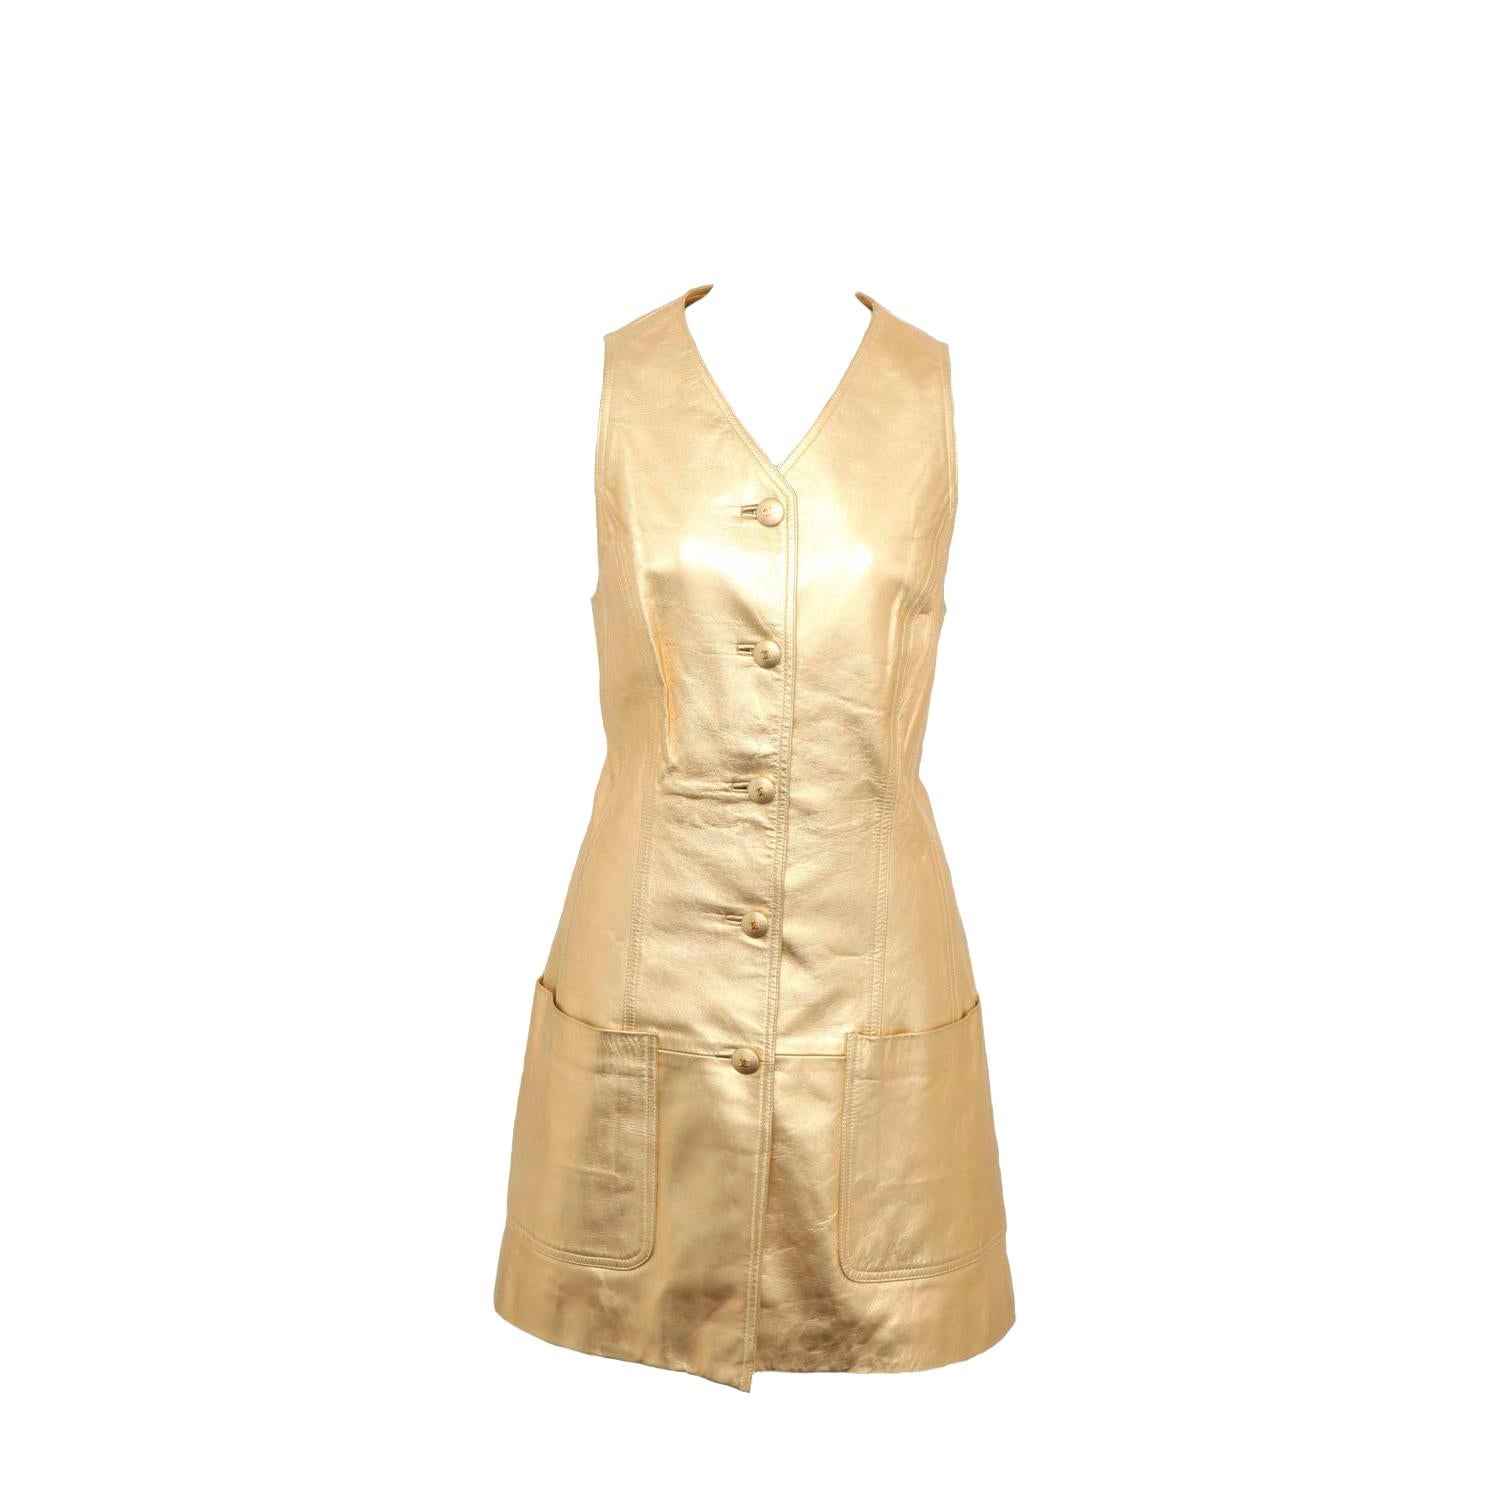 Extremely rare vintage Chanel Gold leather vest dress with CC Buttons. From the 1994 Fall/Winter collection. Belt sold separately.

Specifications: Size 40
Shoulders: 15 inches
Bust: 14.5 Inches
Waist: 16 Inches
Hip: 32 Inches